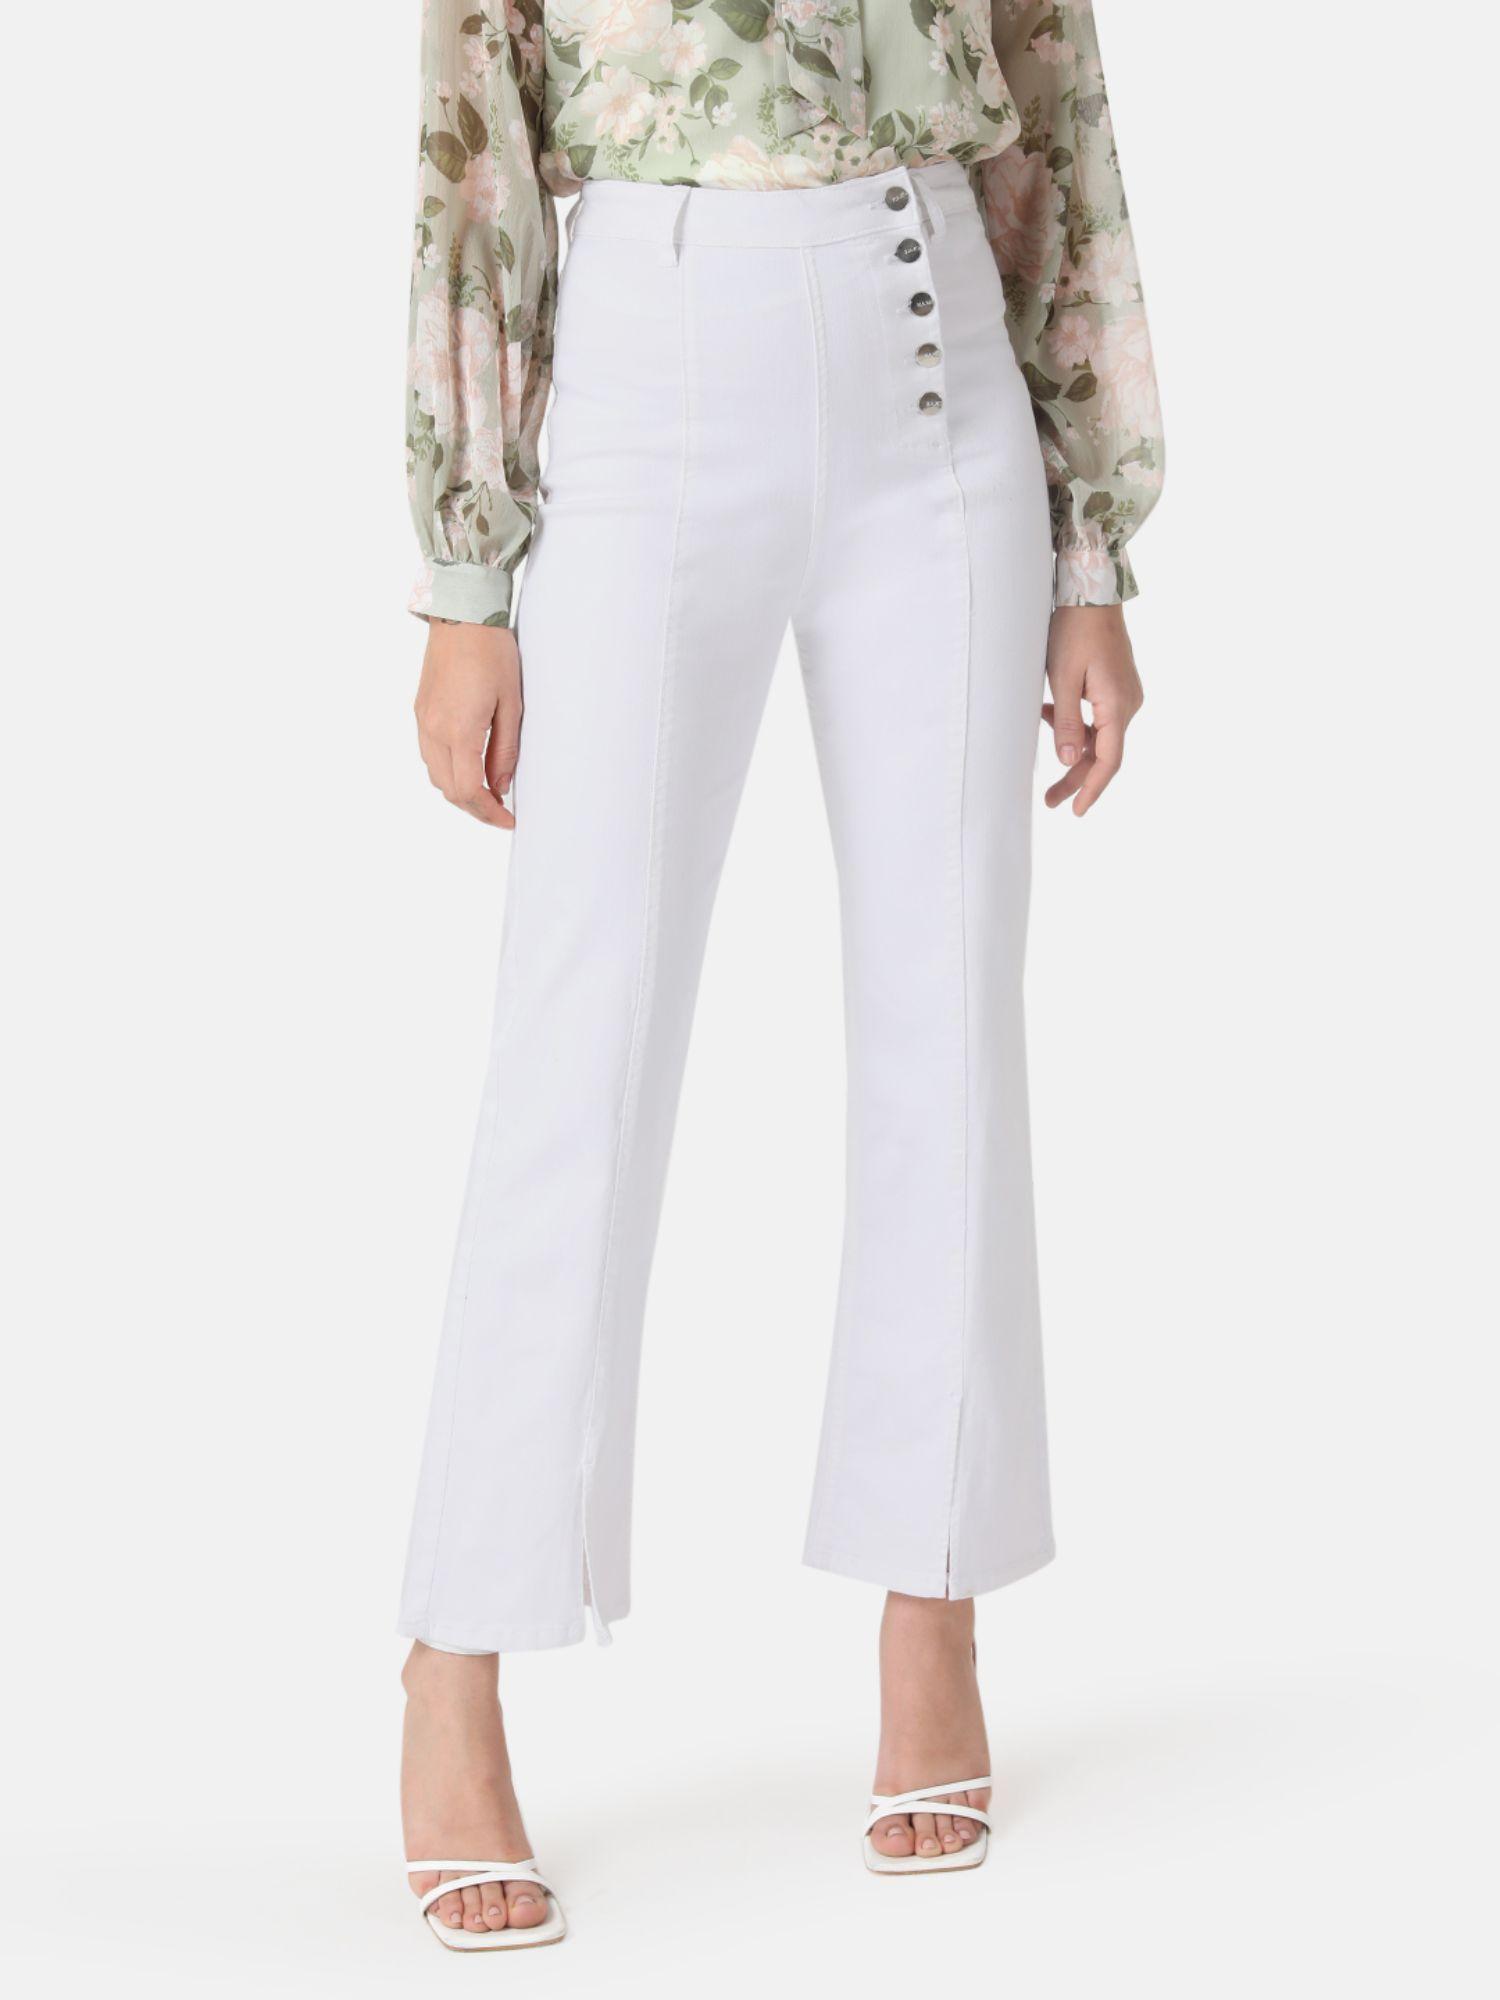 white jeans with side buttons